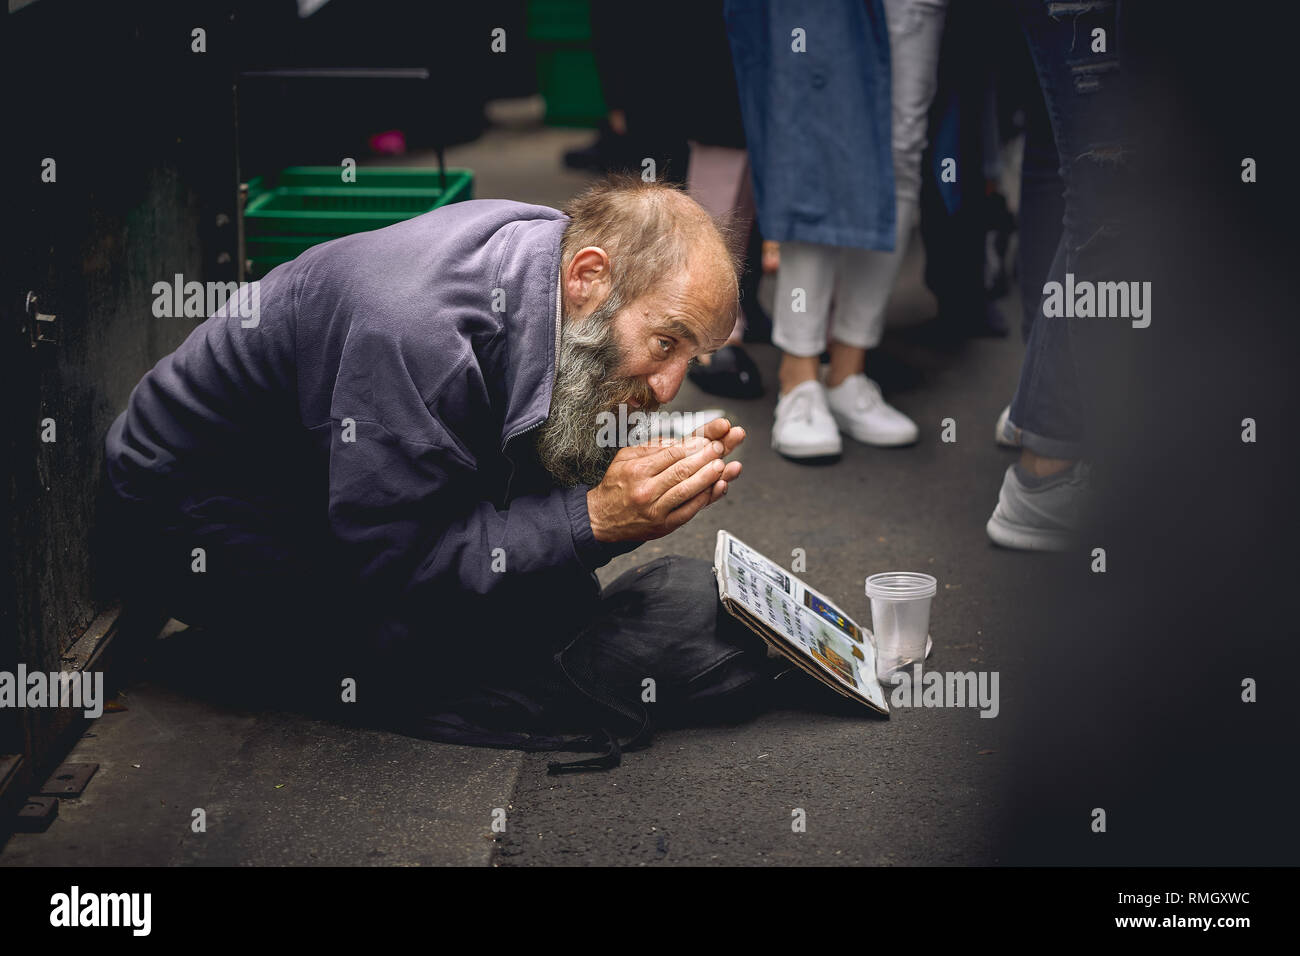 London, UK - June, 2018. An old homeless man begging for help in a crowded Borough Market. Stock Photo